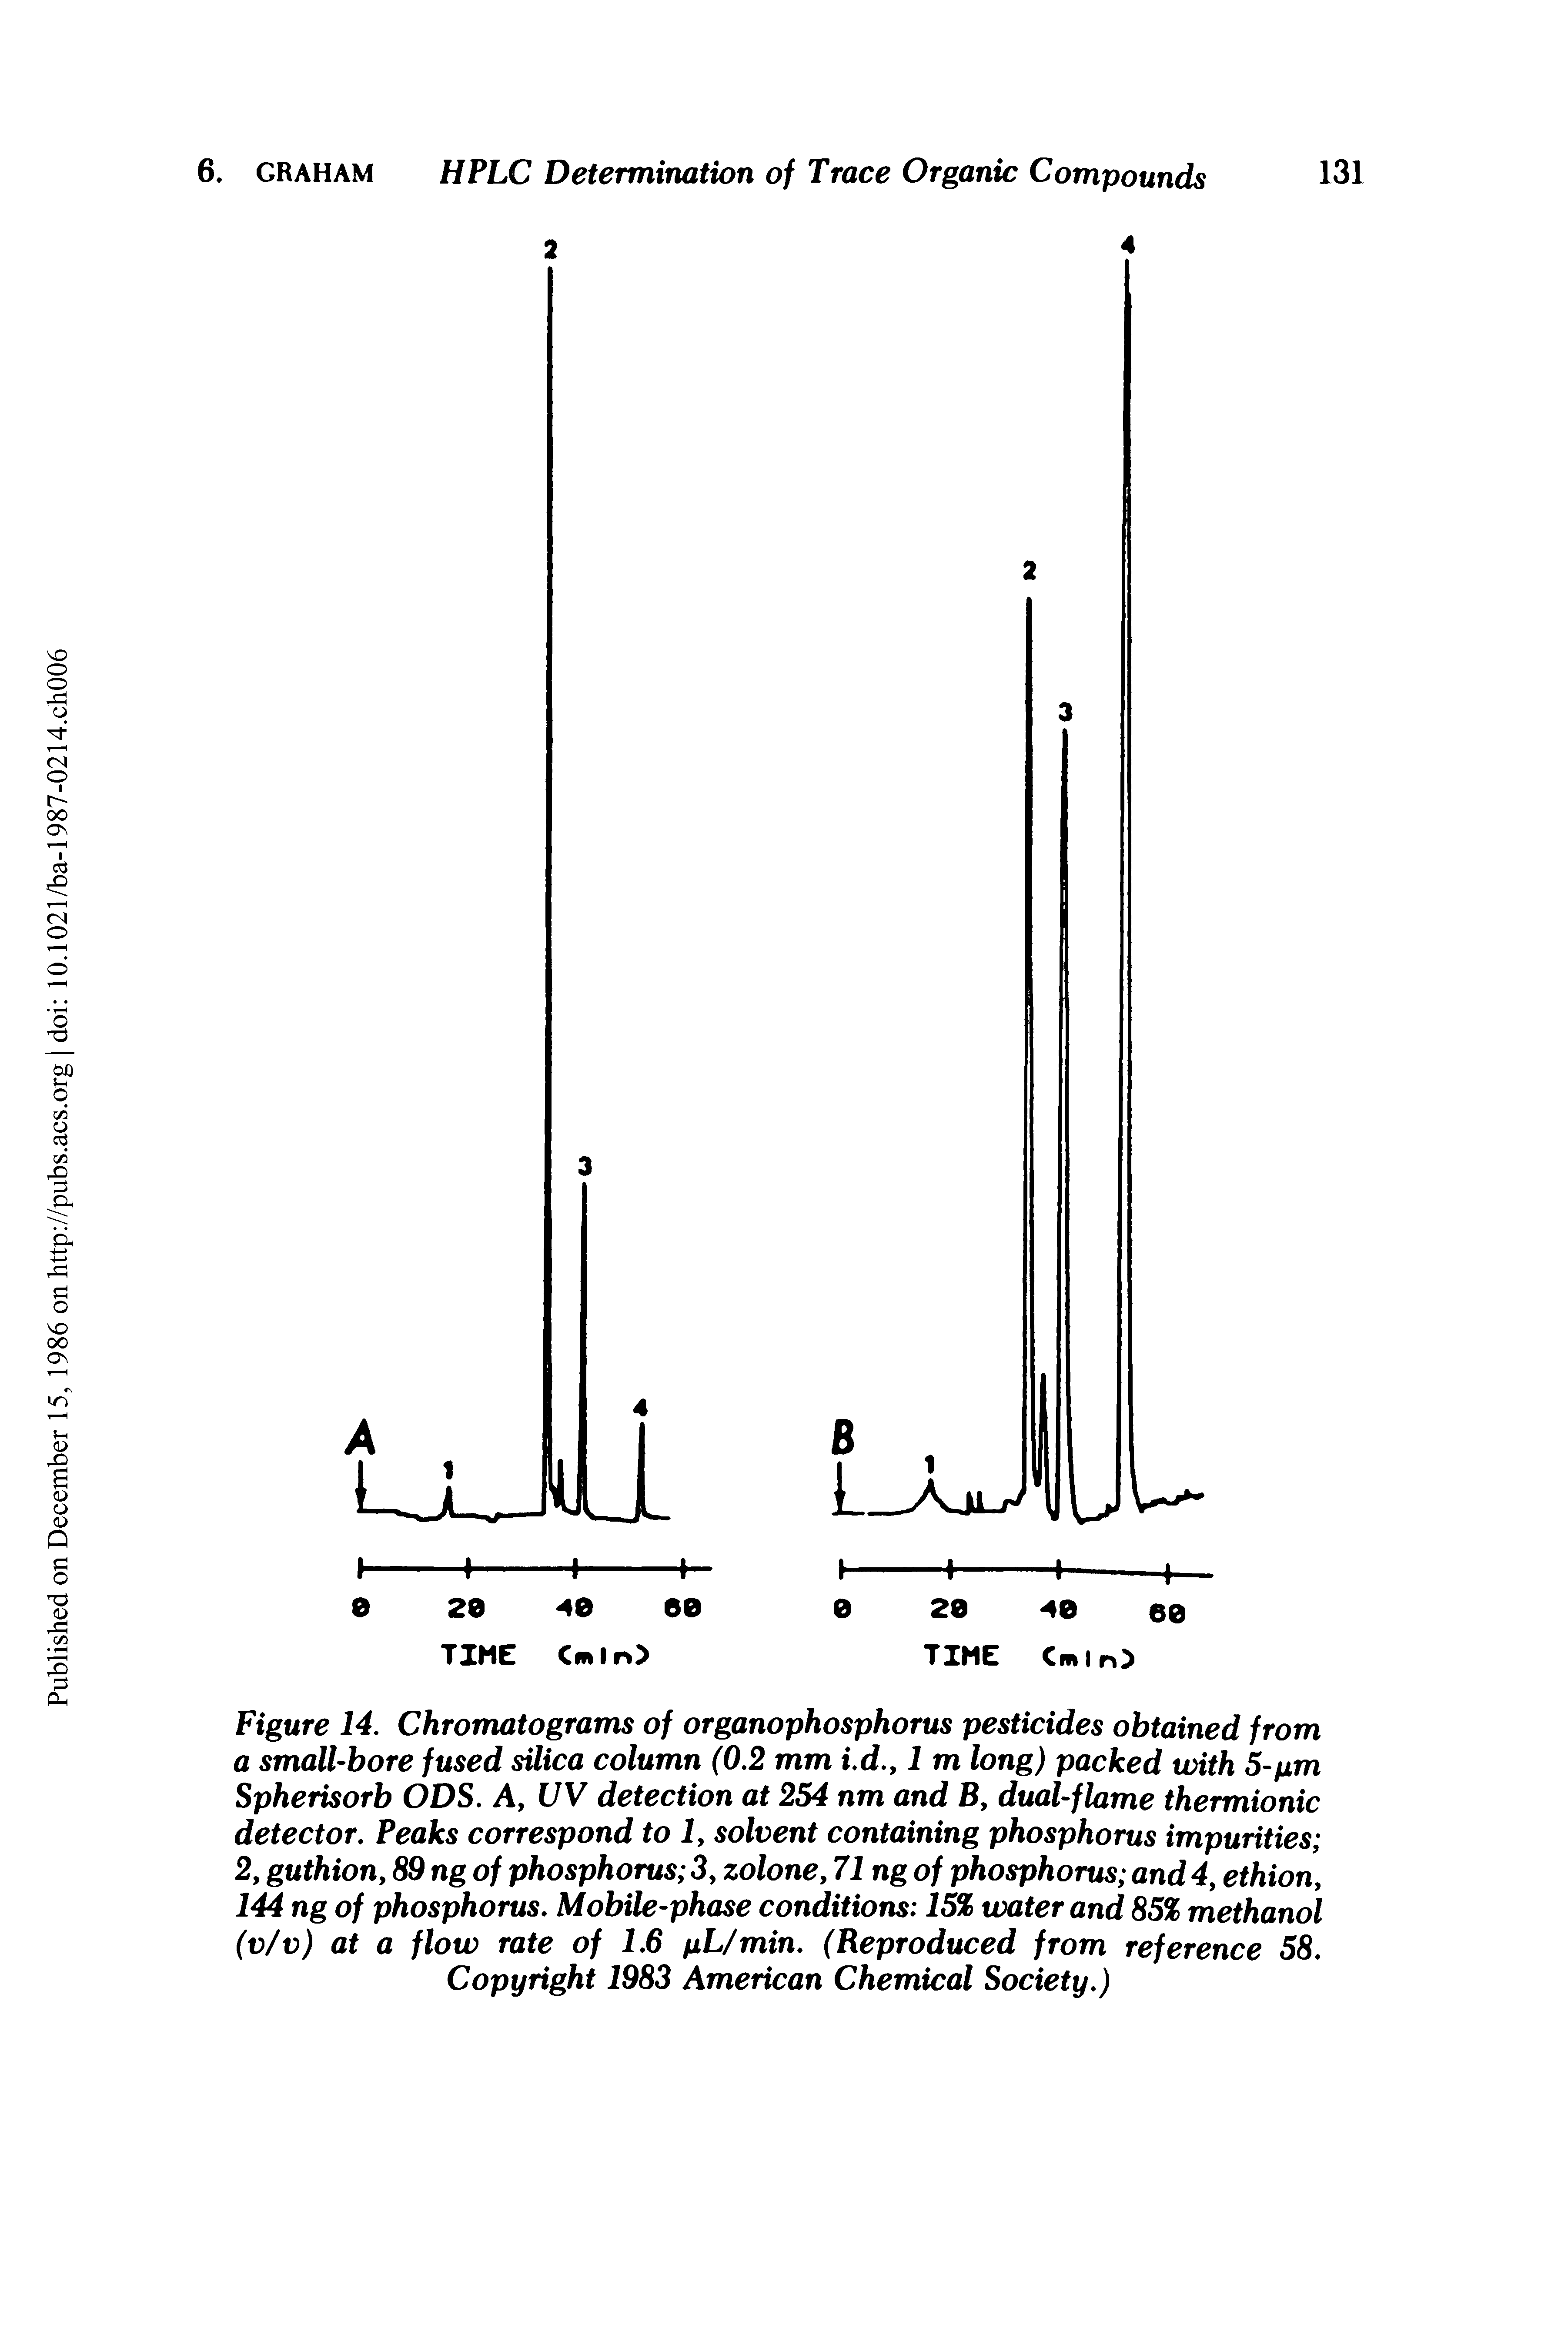 Figure 14. Chromatograms of organophosphorus pesticides obtained from a small-bore fused silica column (0.2 mm i.d., 1 m long) packed with 5-pm Spherisorb ODS. A, UV detection at 254 nm and B, dual-flame thermionic detector. Peaks correspond to 1, solvent containing phosphorus impurities 2, guthion, 89 ng of phosphorus 3, zolone, 71 ng of phosphorus and 4y ethion, 144 ng of phosphorus. Mobile-phase conditions 15% water and 85% methanol (v/v) at a flow rate of 1.6 pL/min. (Reproduced from reference 58. Copyright 1983 American Chemical Society.)...